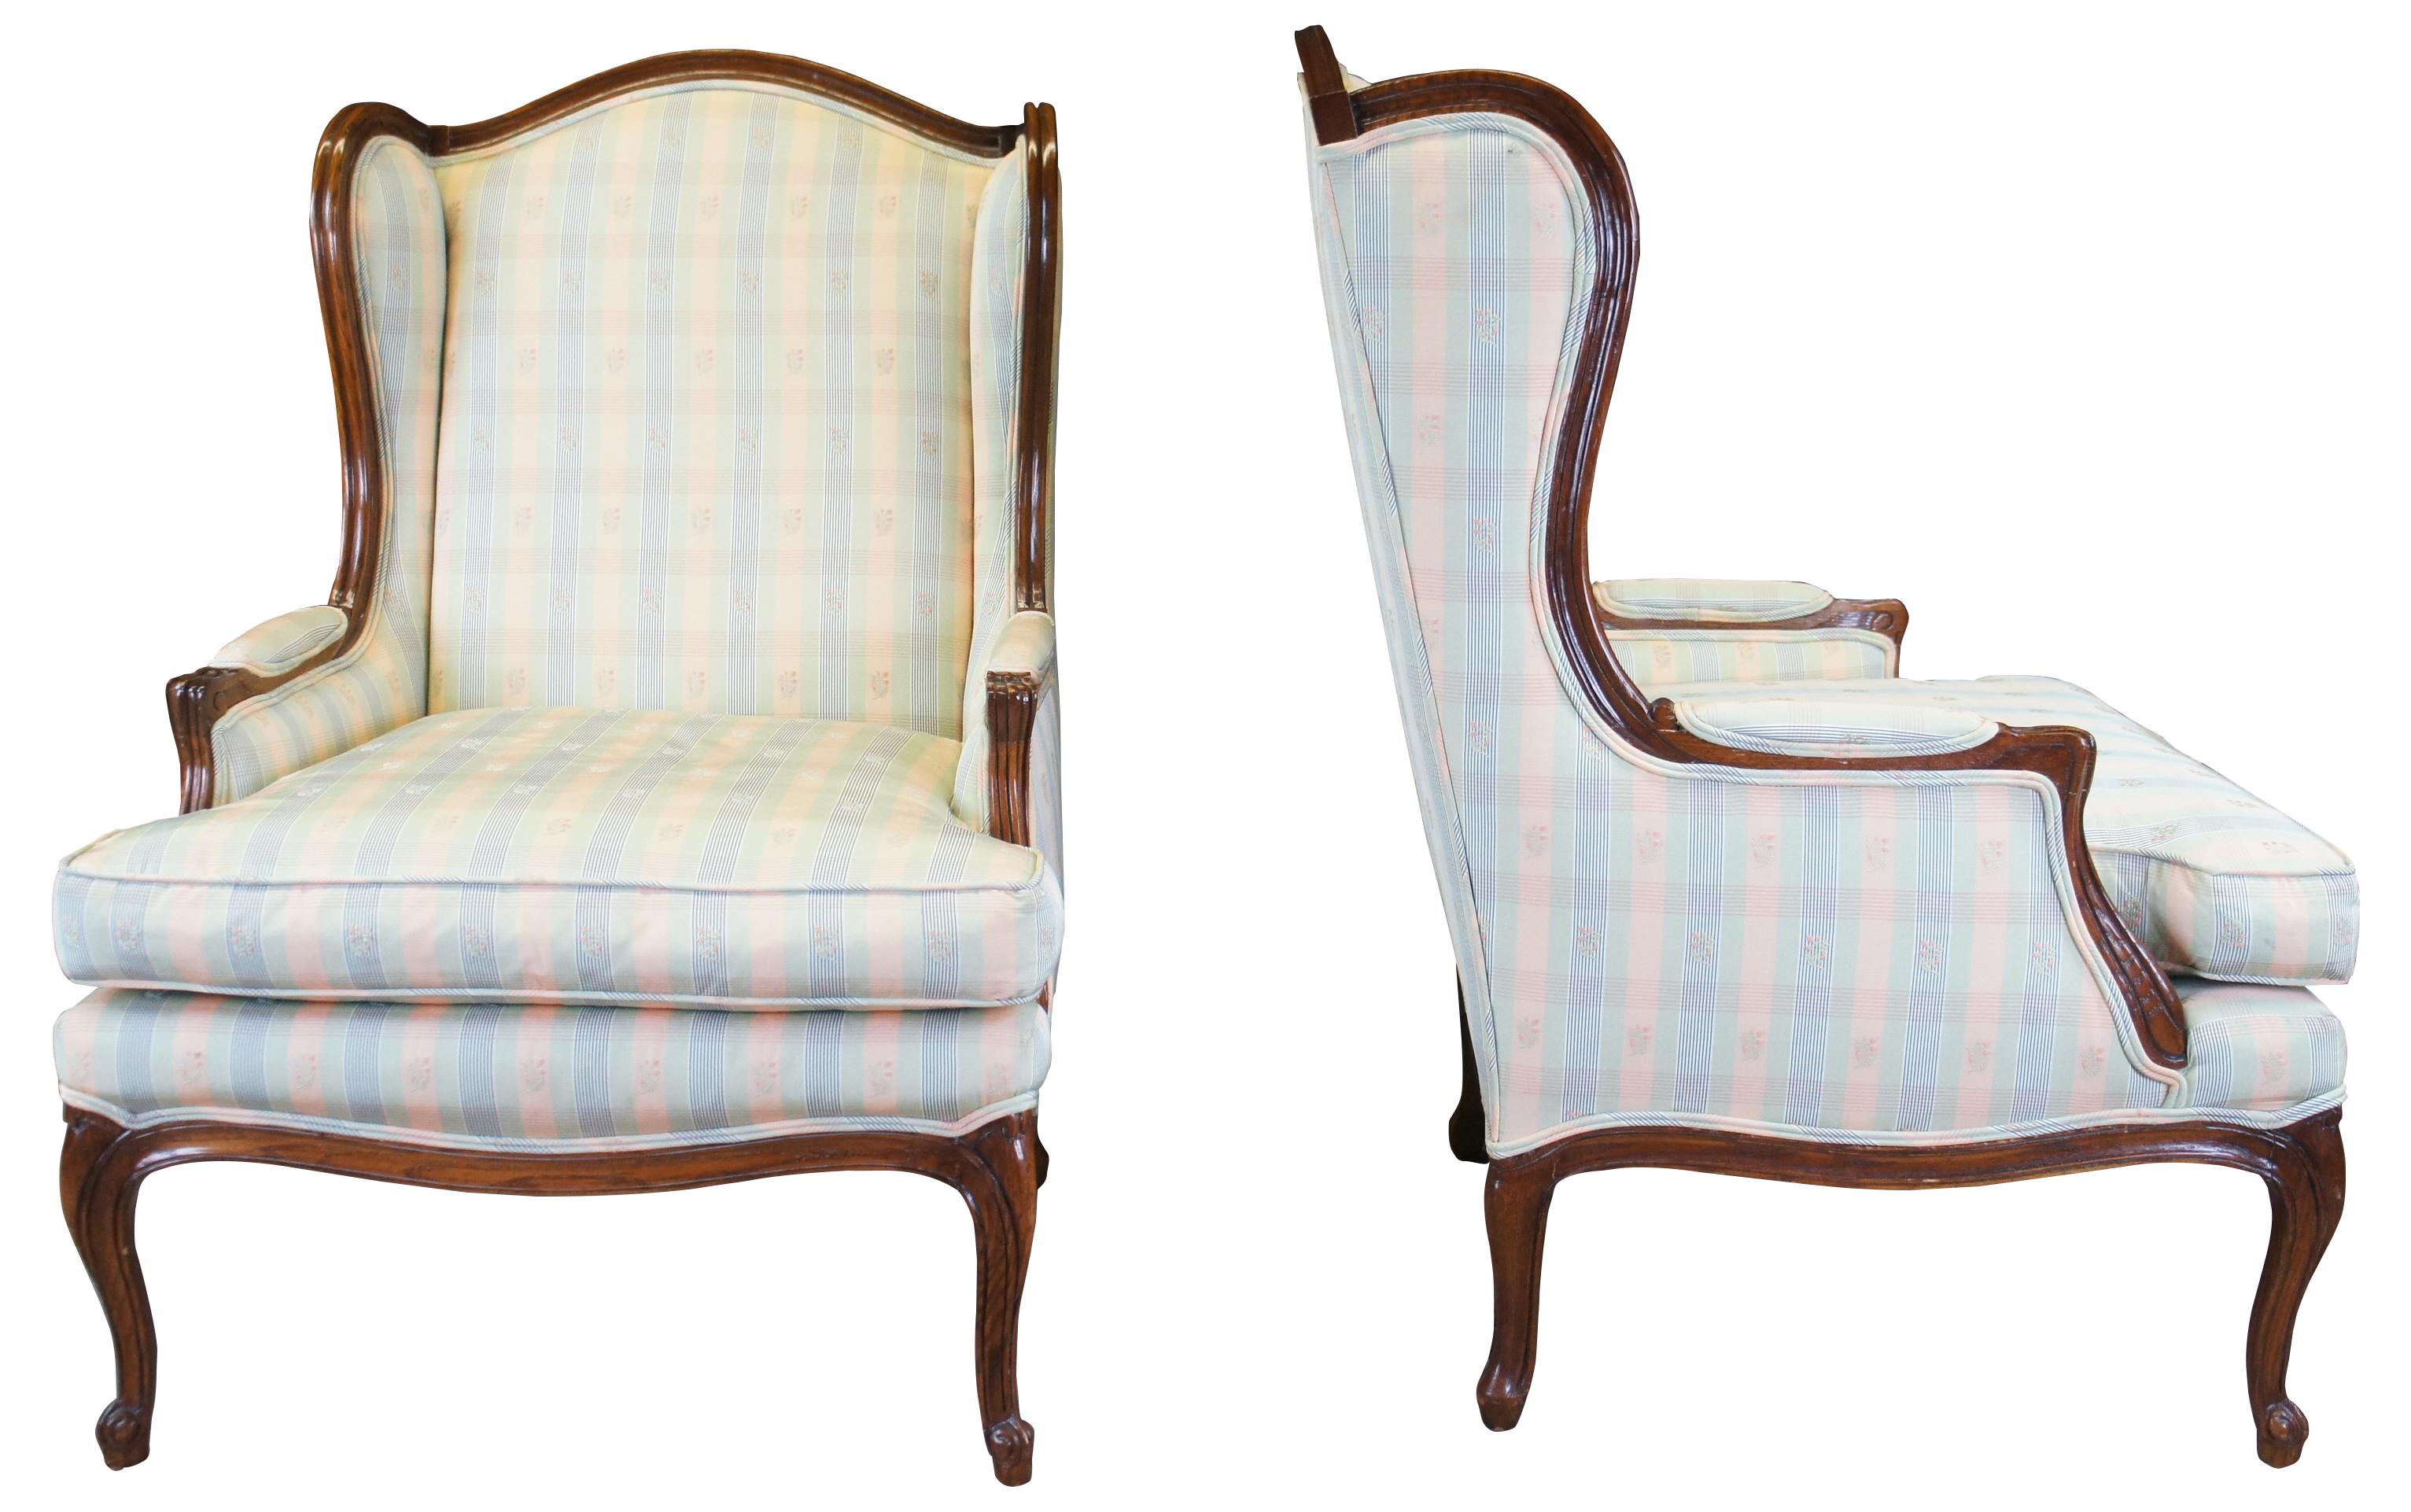 A beautiful pair of French Bergere wingback chairs by Baker Furniture, circa 1970s. Made from oak with a camelback leading to contoured sides and padded arms. The chair is supported by cabriole legs with scrolled feet along the front. Upholstered in